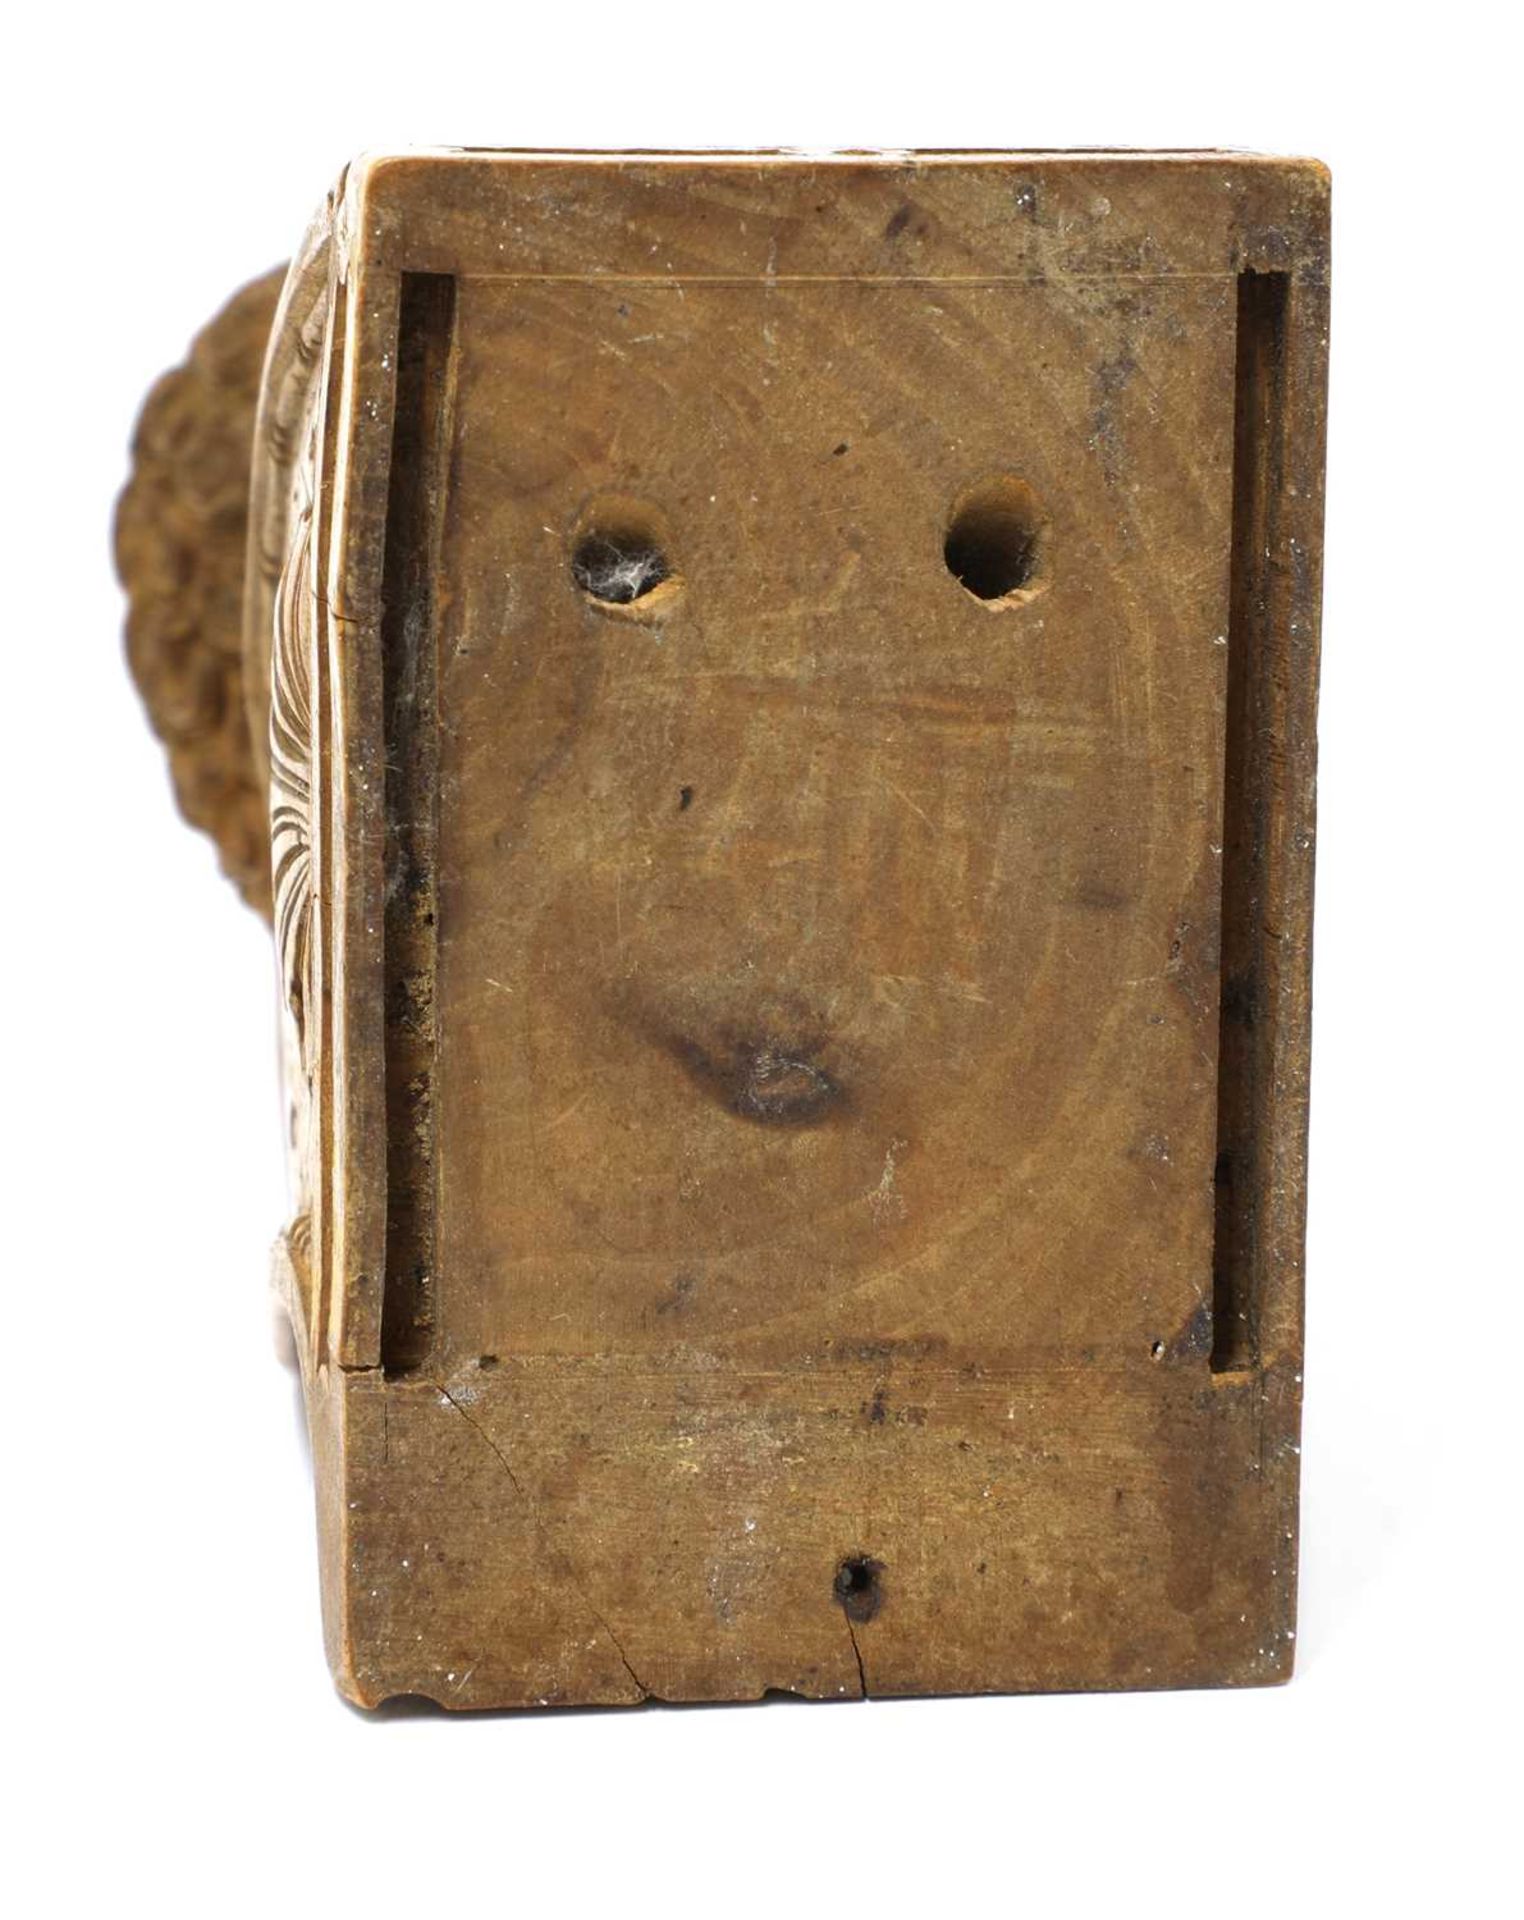 A carved wooden hurdy-gurdy stock head, - Image 8 of 8